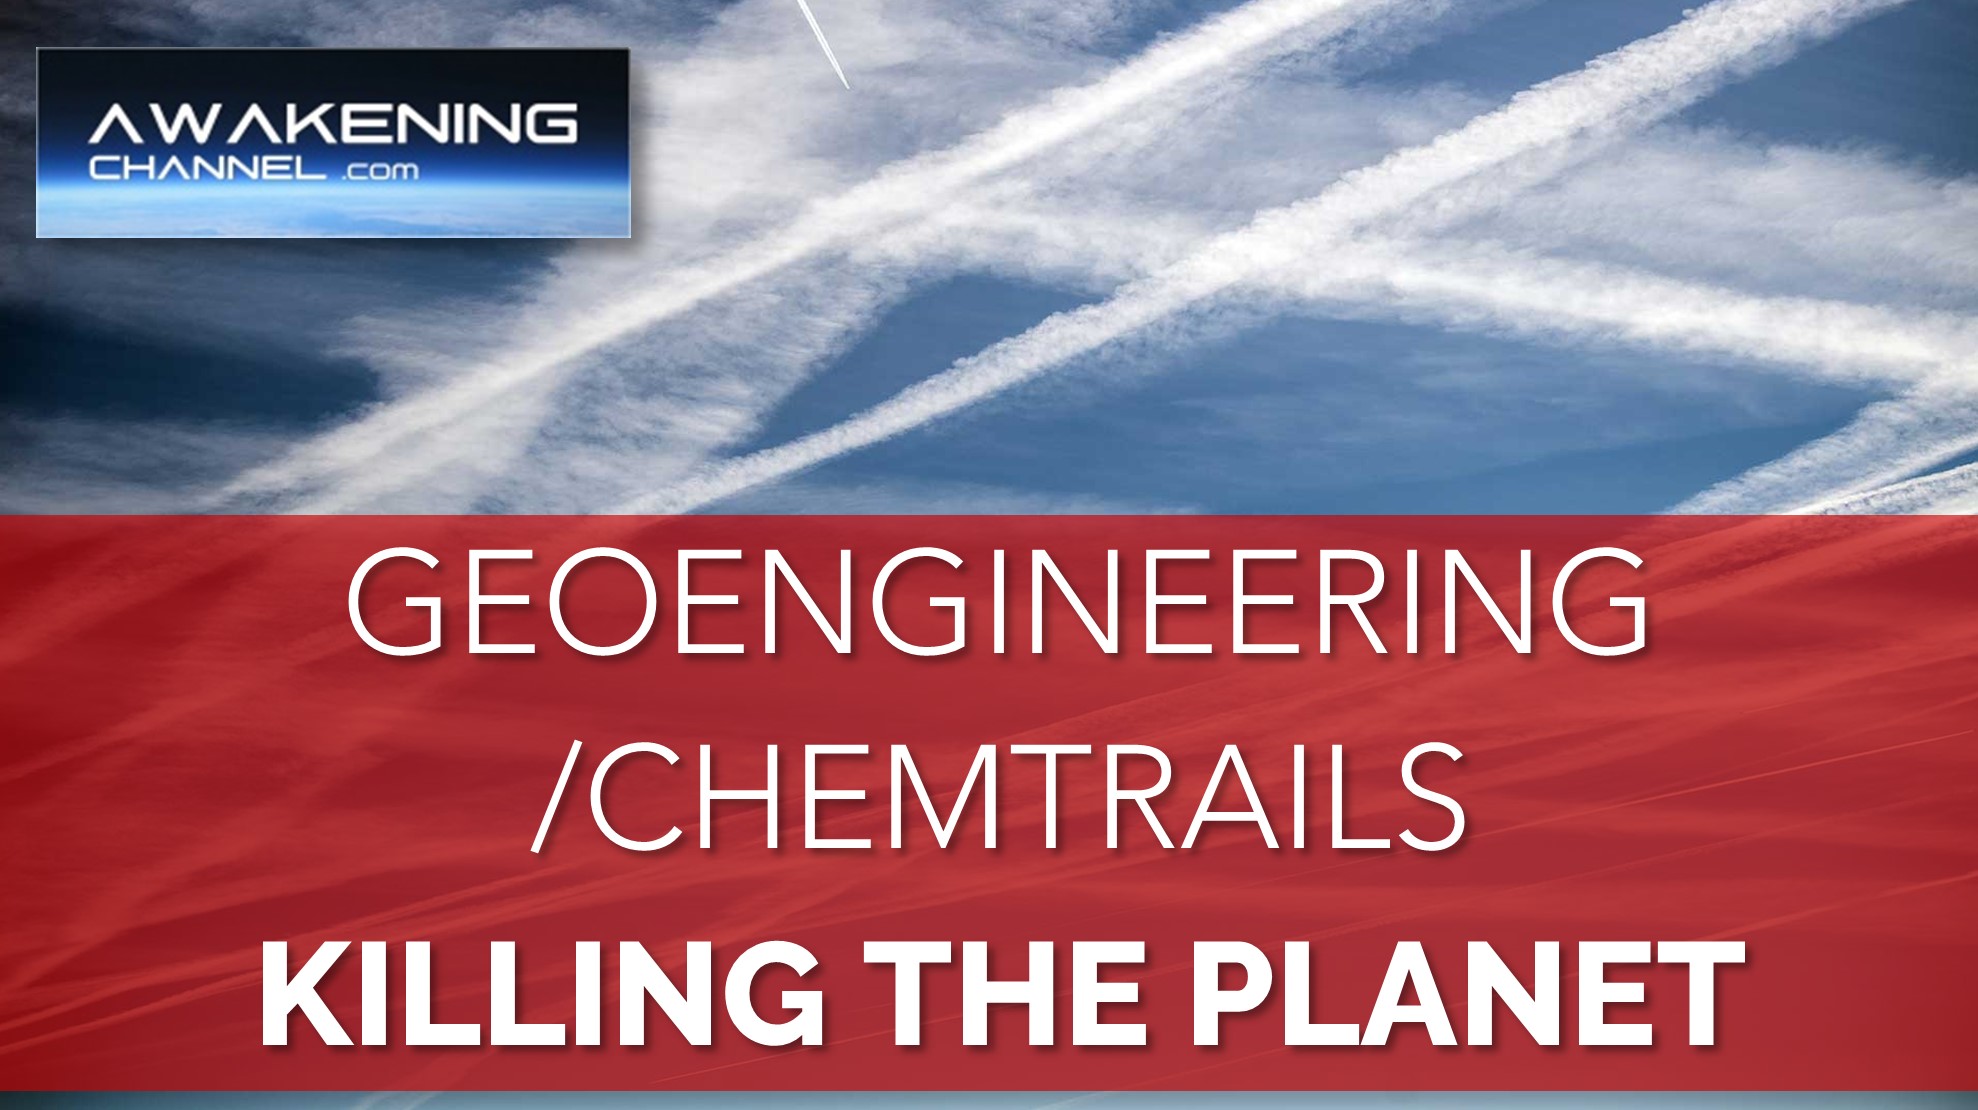 CHEMTRAILS ARE KILLING THE PLANET